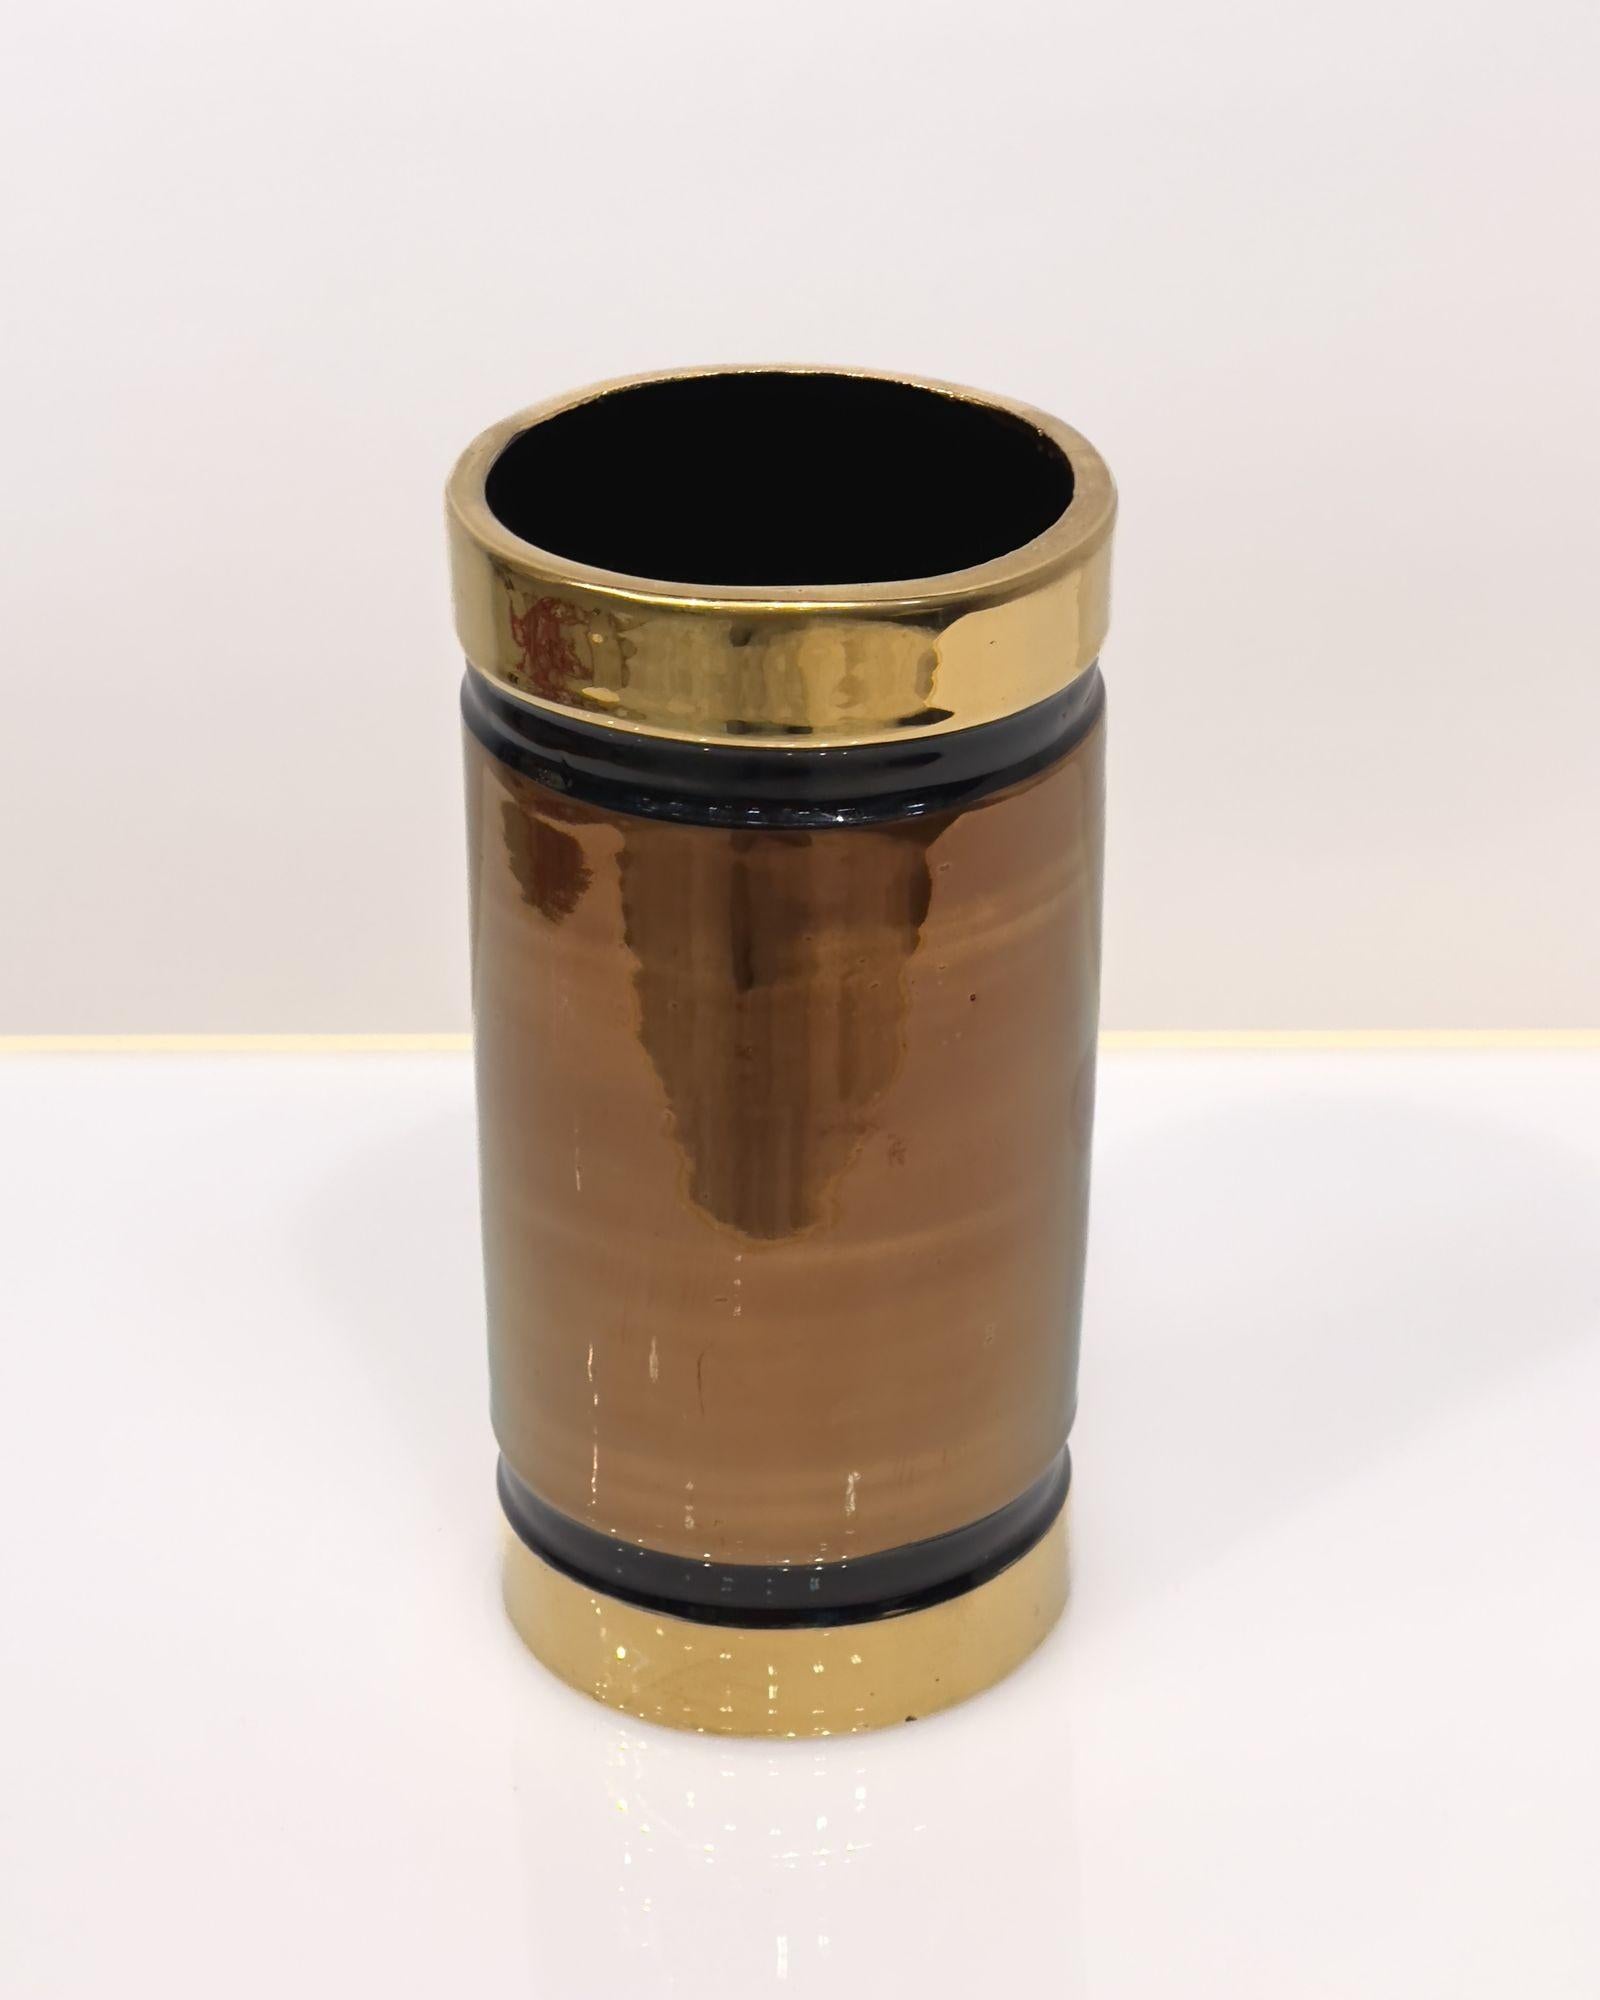 Bitossi Rosenthal-Netter Vase Gold/Black Metallic, Italy In Excellent Condition For Sale In Chicago, IL